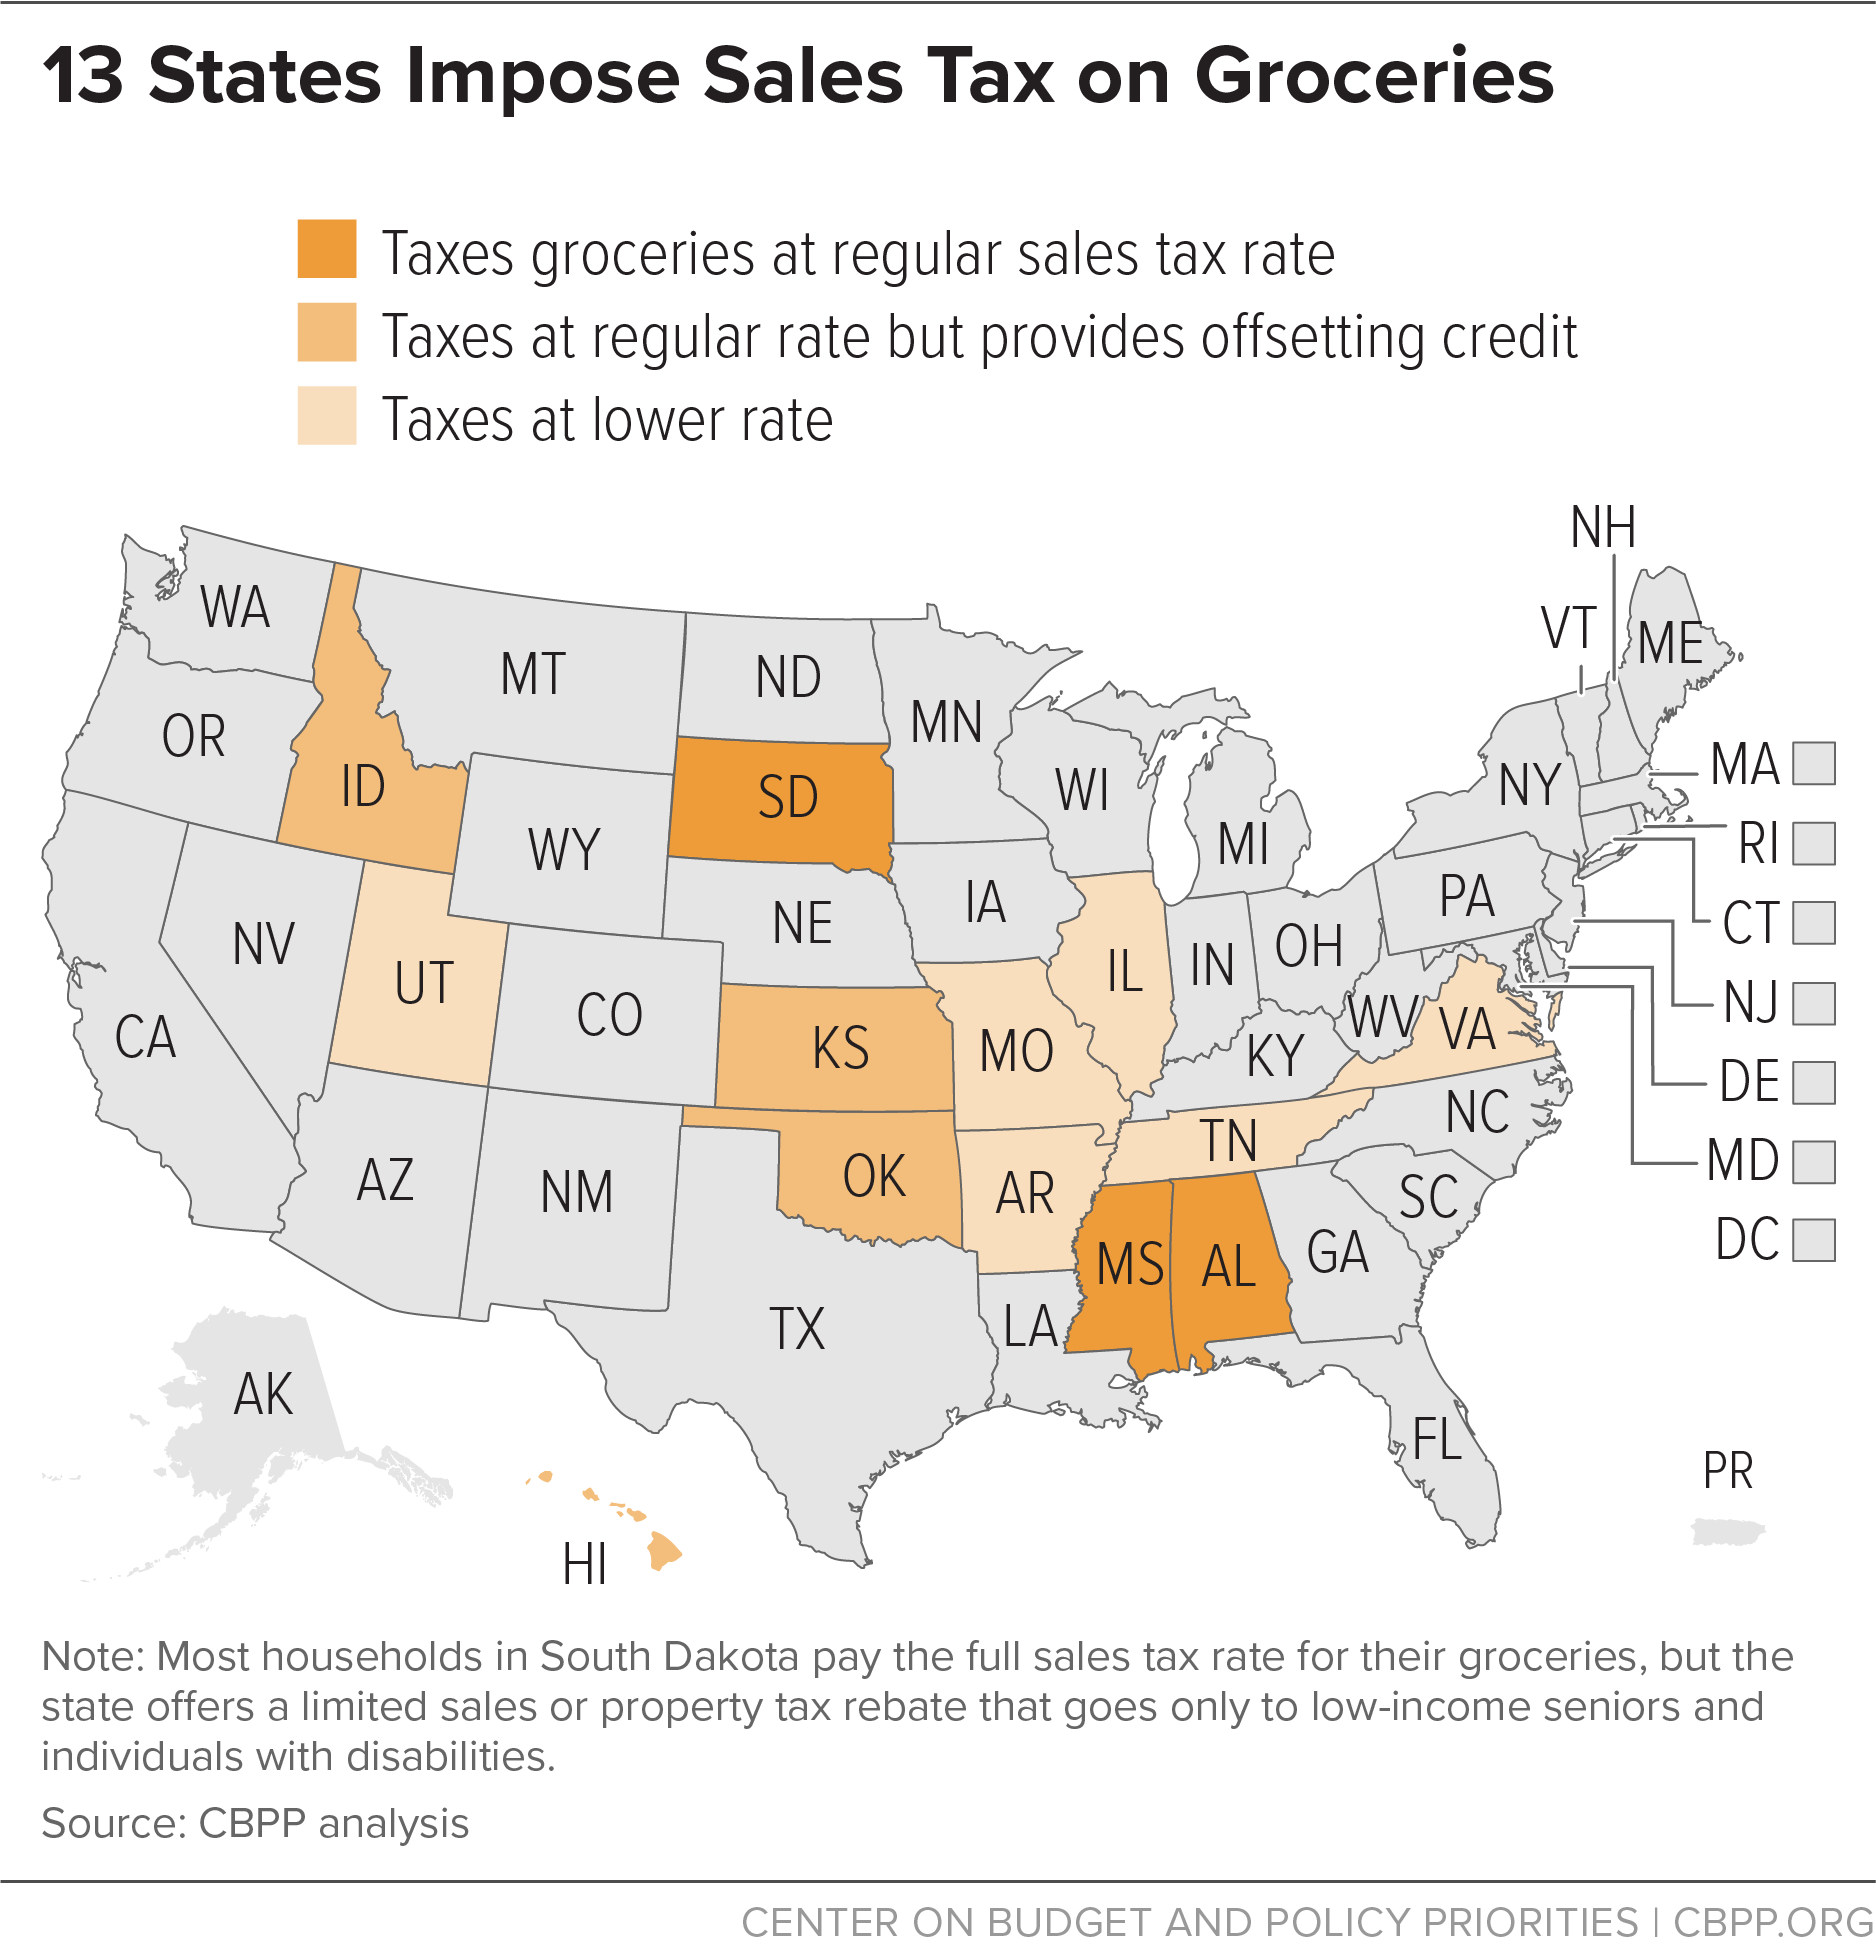 13 States Impose Sales Tax on Groceries